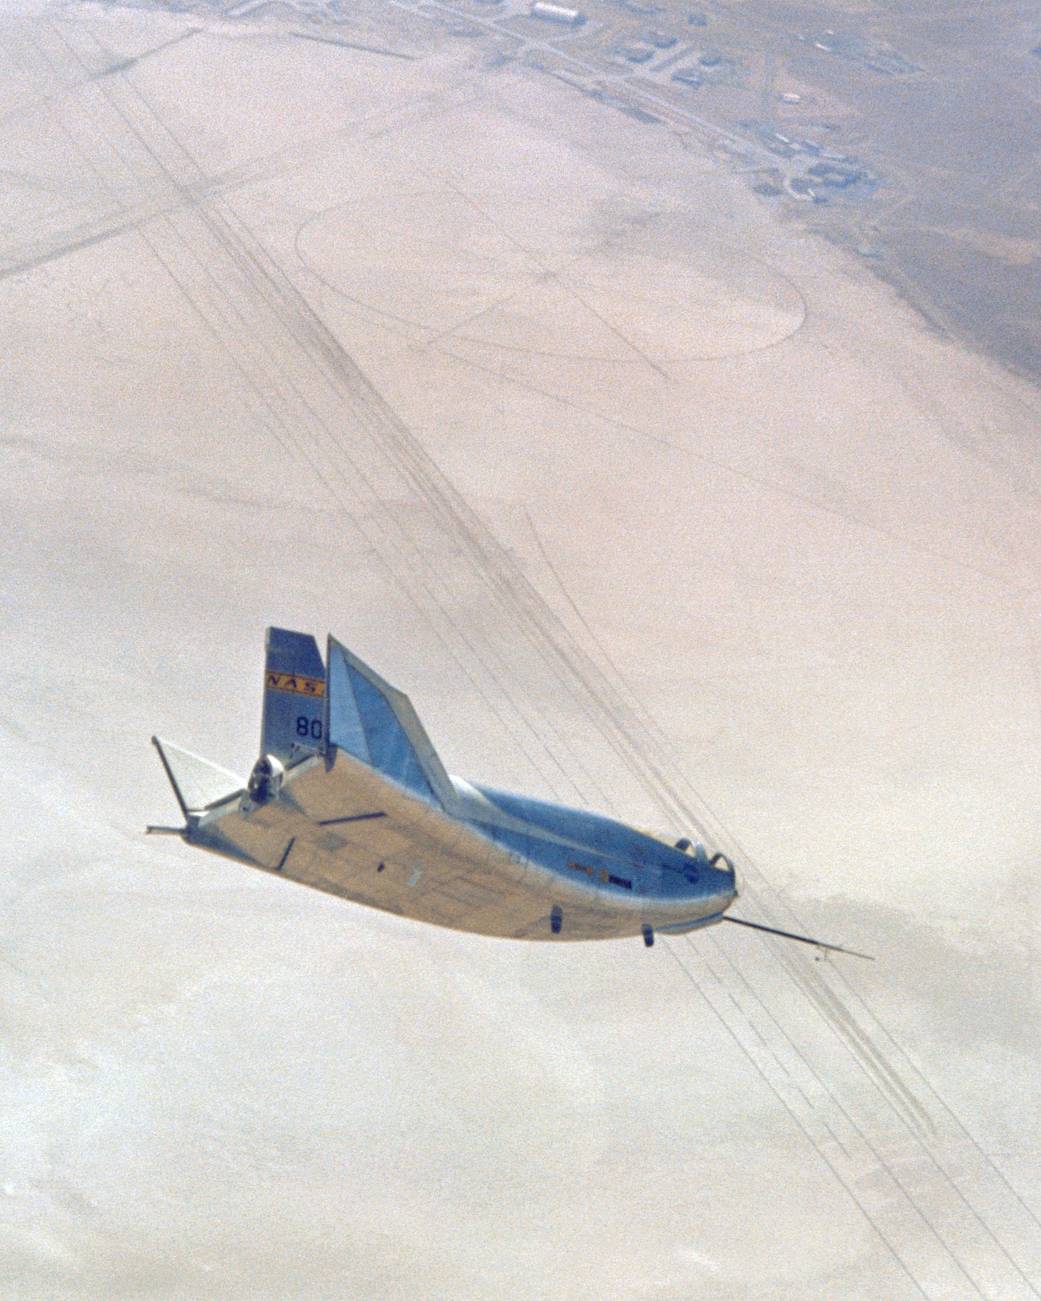 The HL-10 in flight, turning to line up with lakebed runway 18.